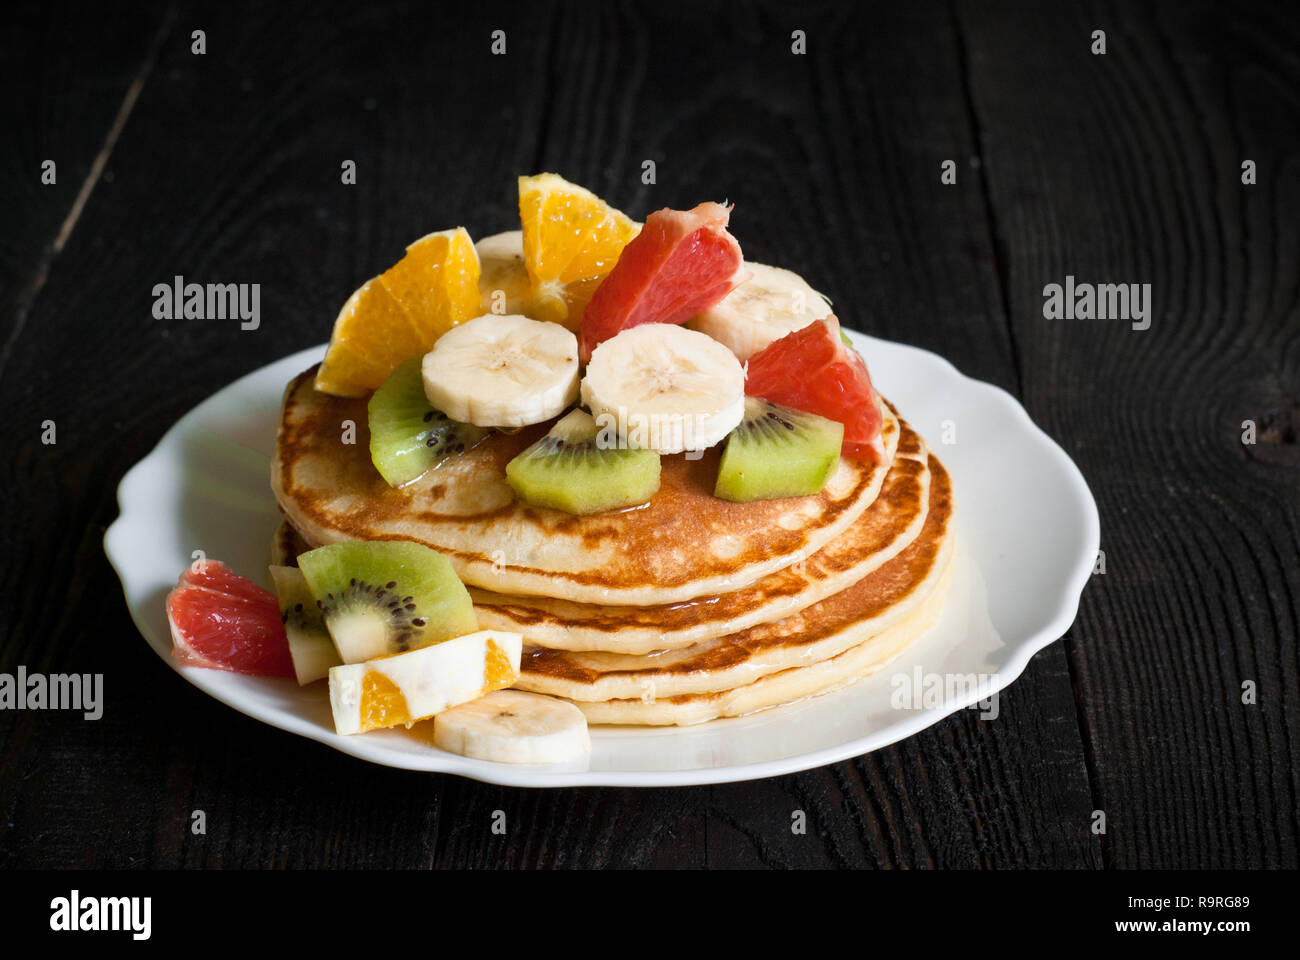 Plate of pancakes with fruits and honey at dark wooden table. Stock Photo